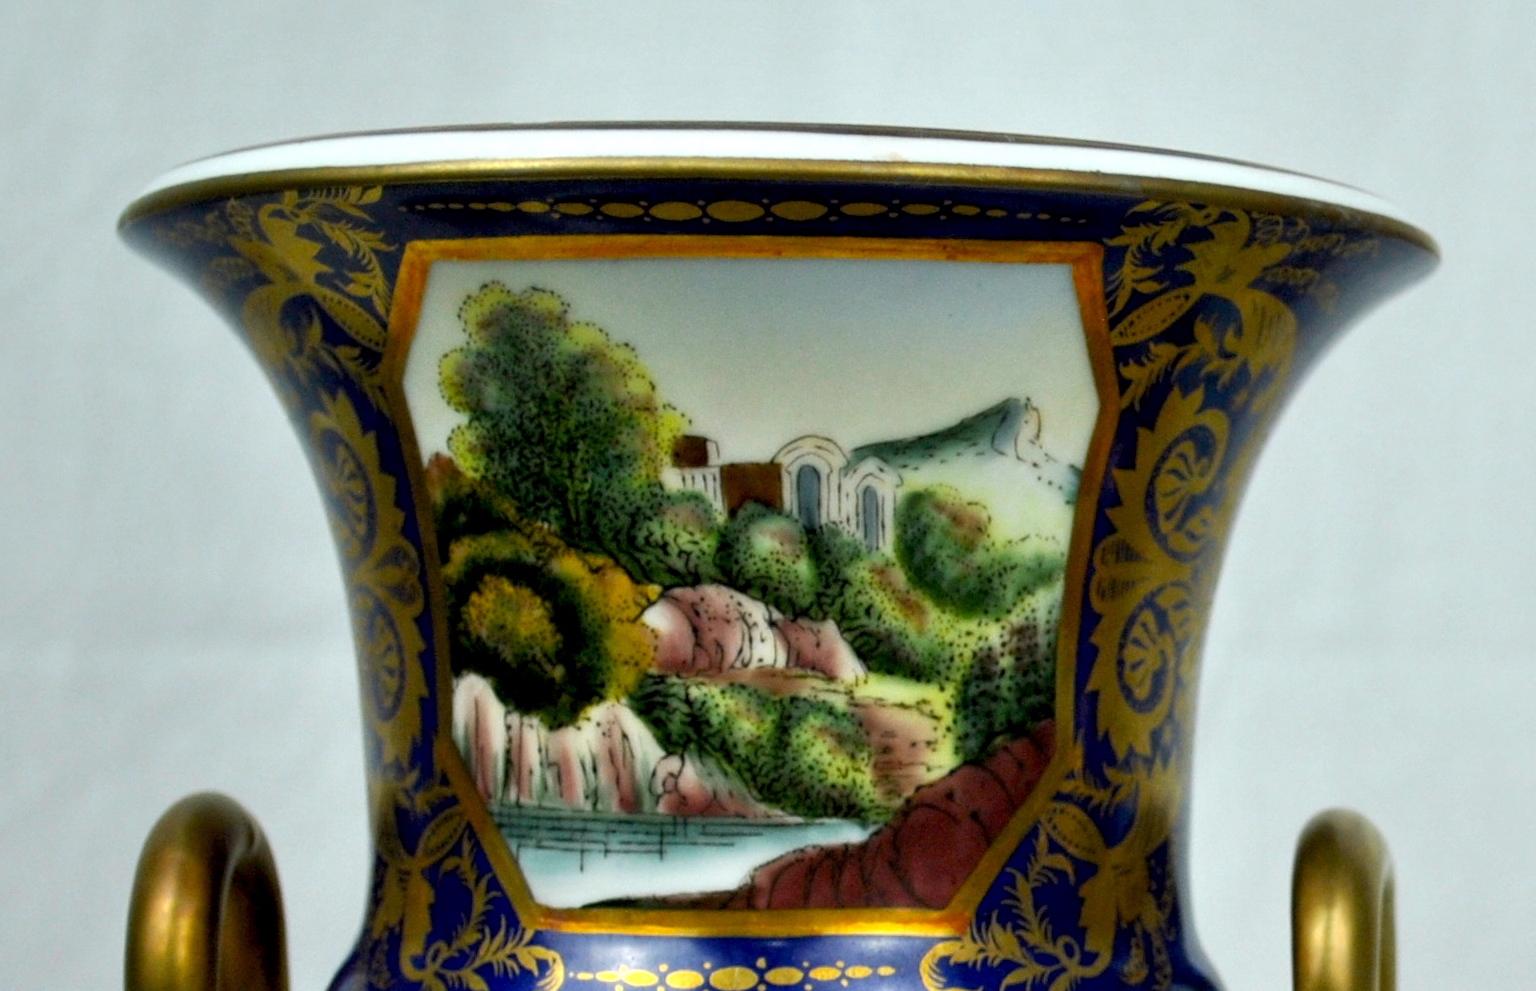 A 20th century pair of deep blue and gold hand painted guilt sieve vases with painted landscape scenes and guilt serpentine snake handles.